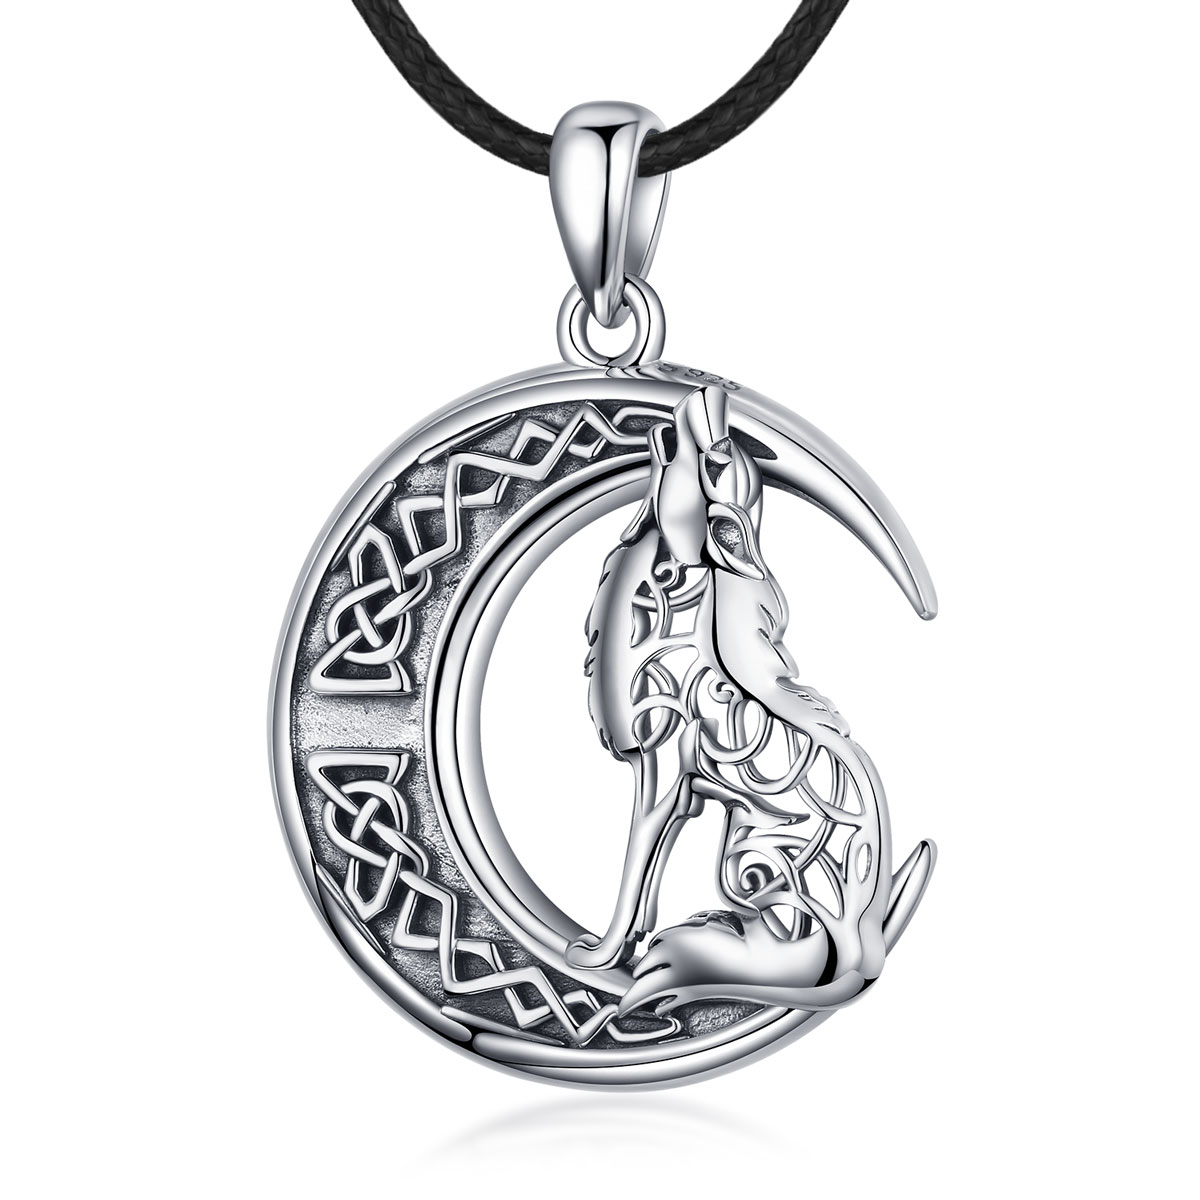 Fashionable men's jewelry S925 Sterling Silver Vintage Celtic Crescent Howling Wolf moon charm pendant necklace